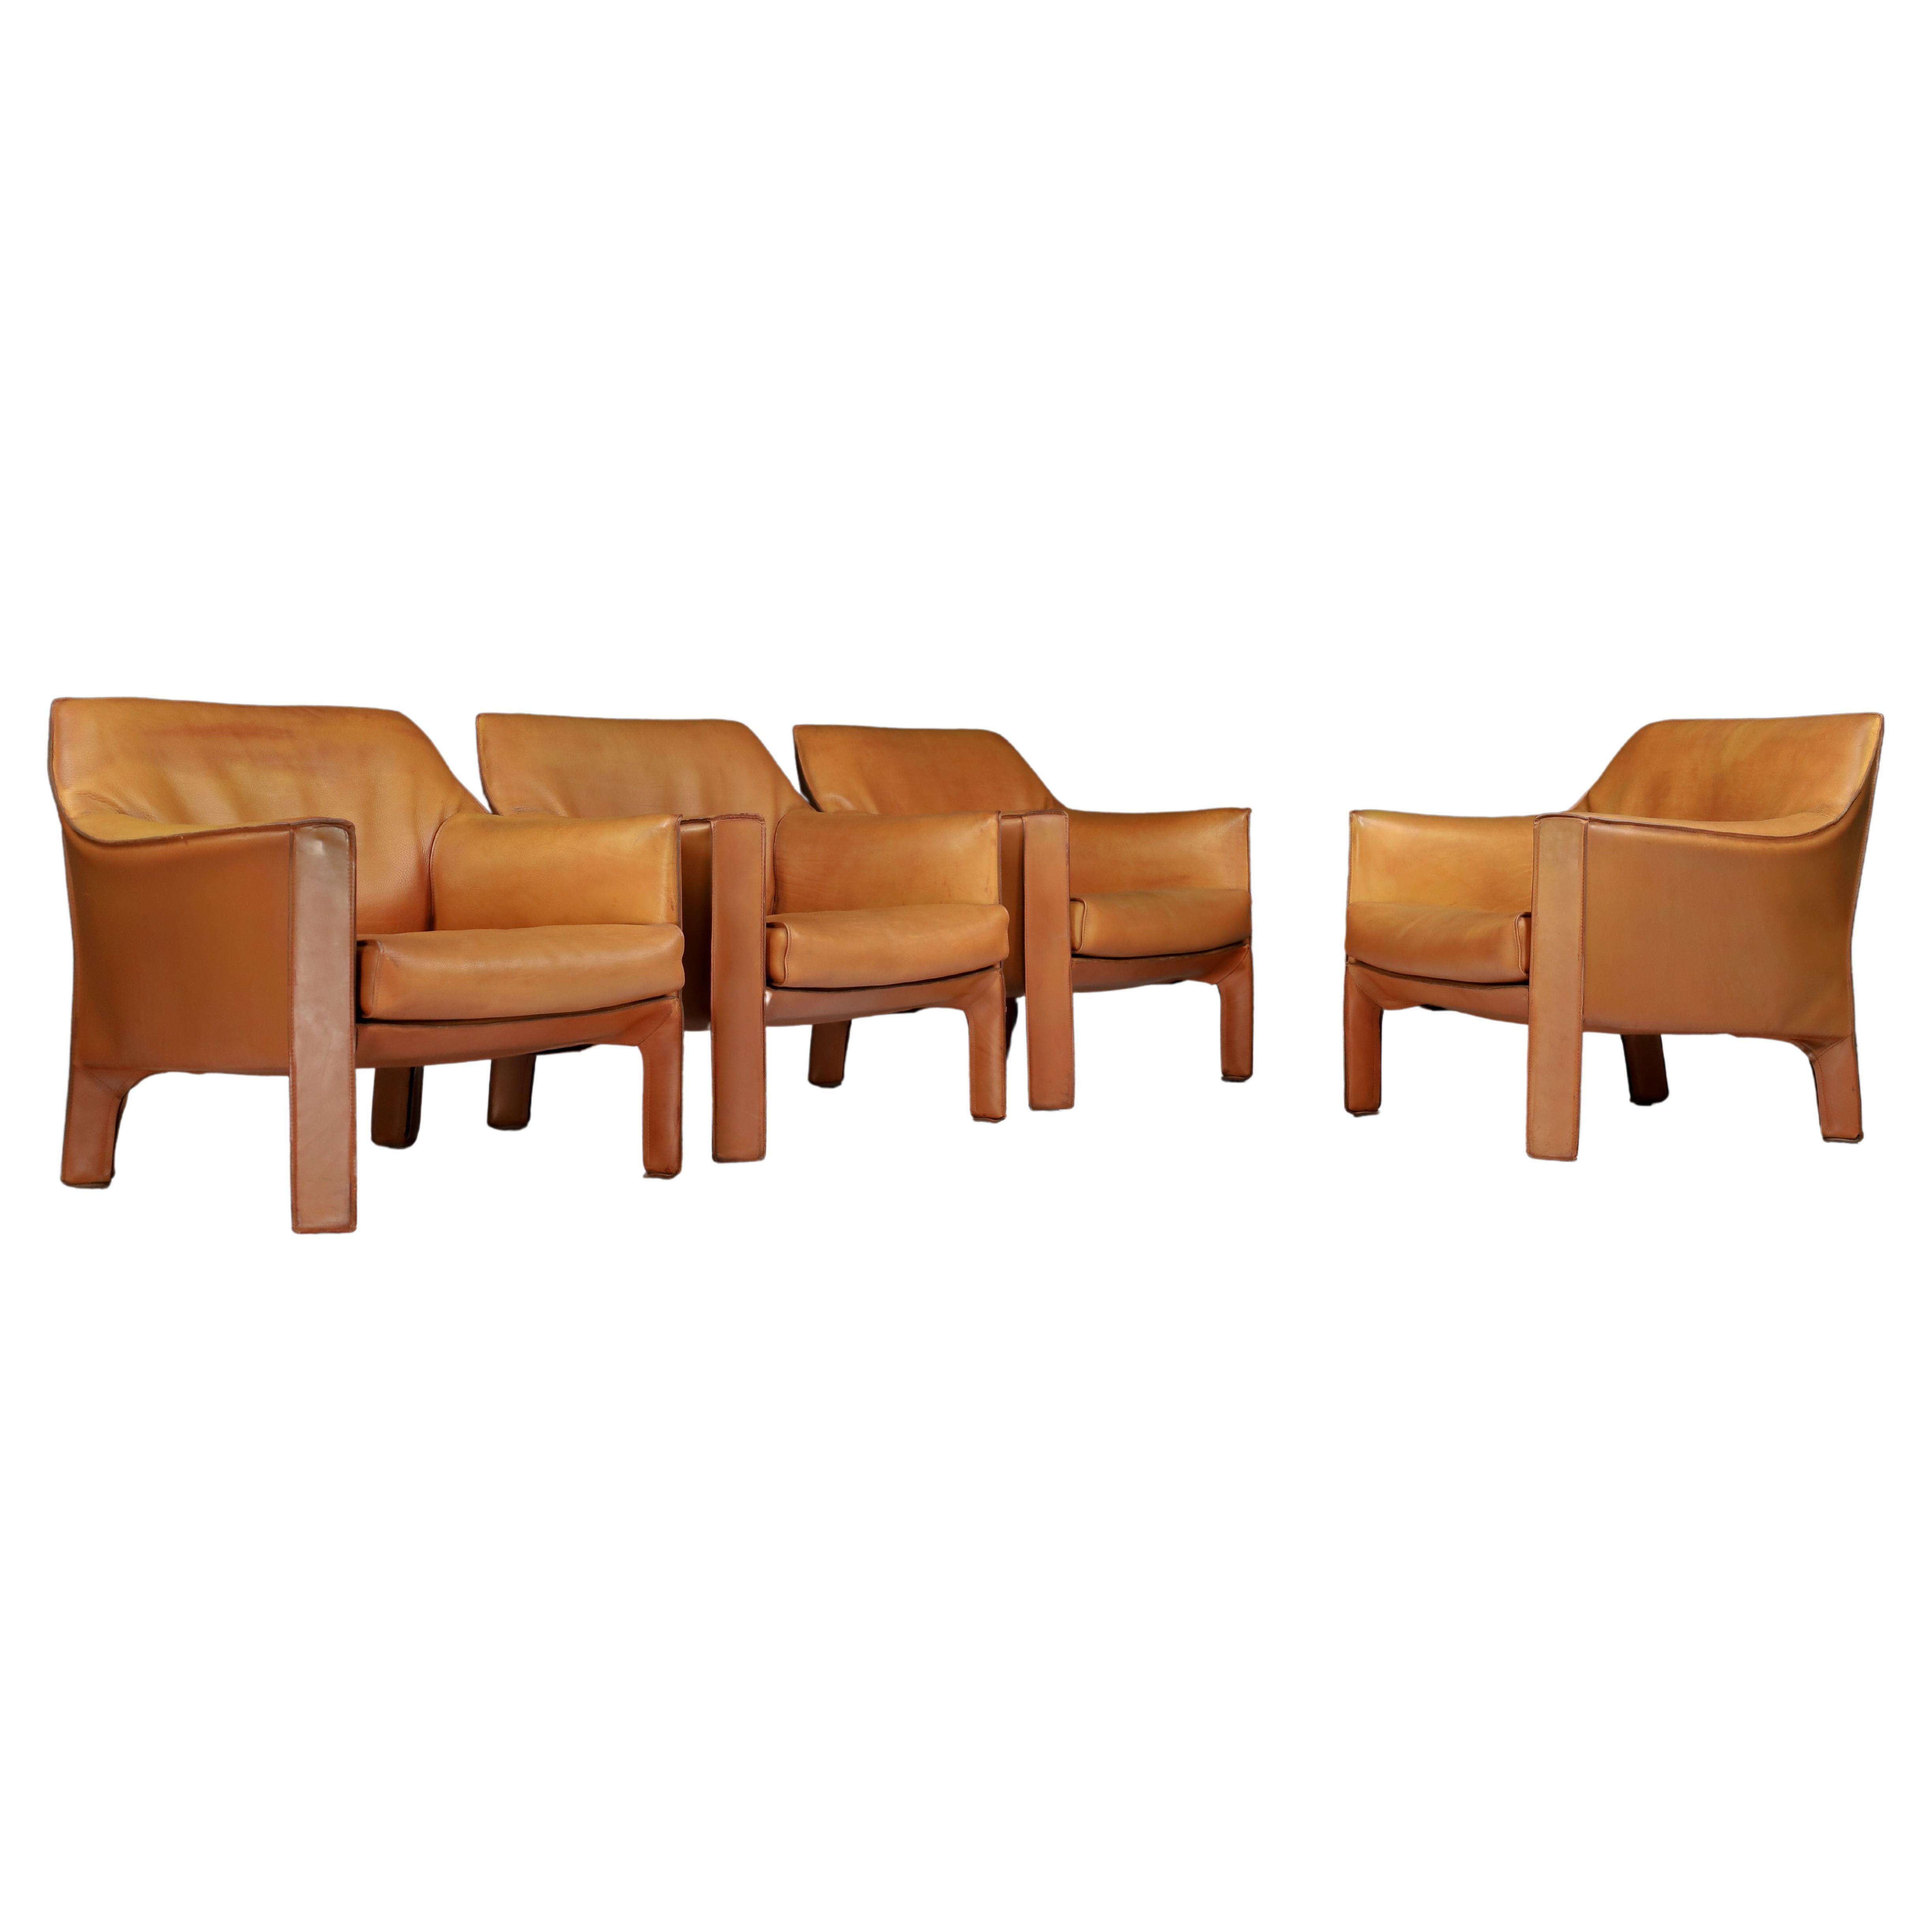 Mario Bellini for Cassina Cab 415 Buffalo Cognac Leather Club Chairs Italy 1980s